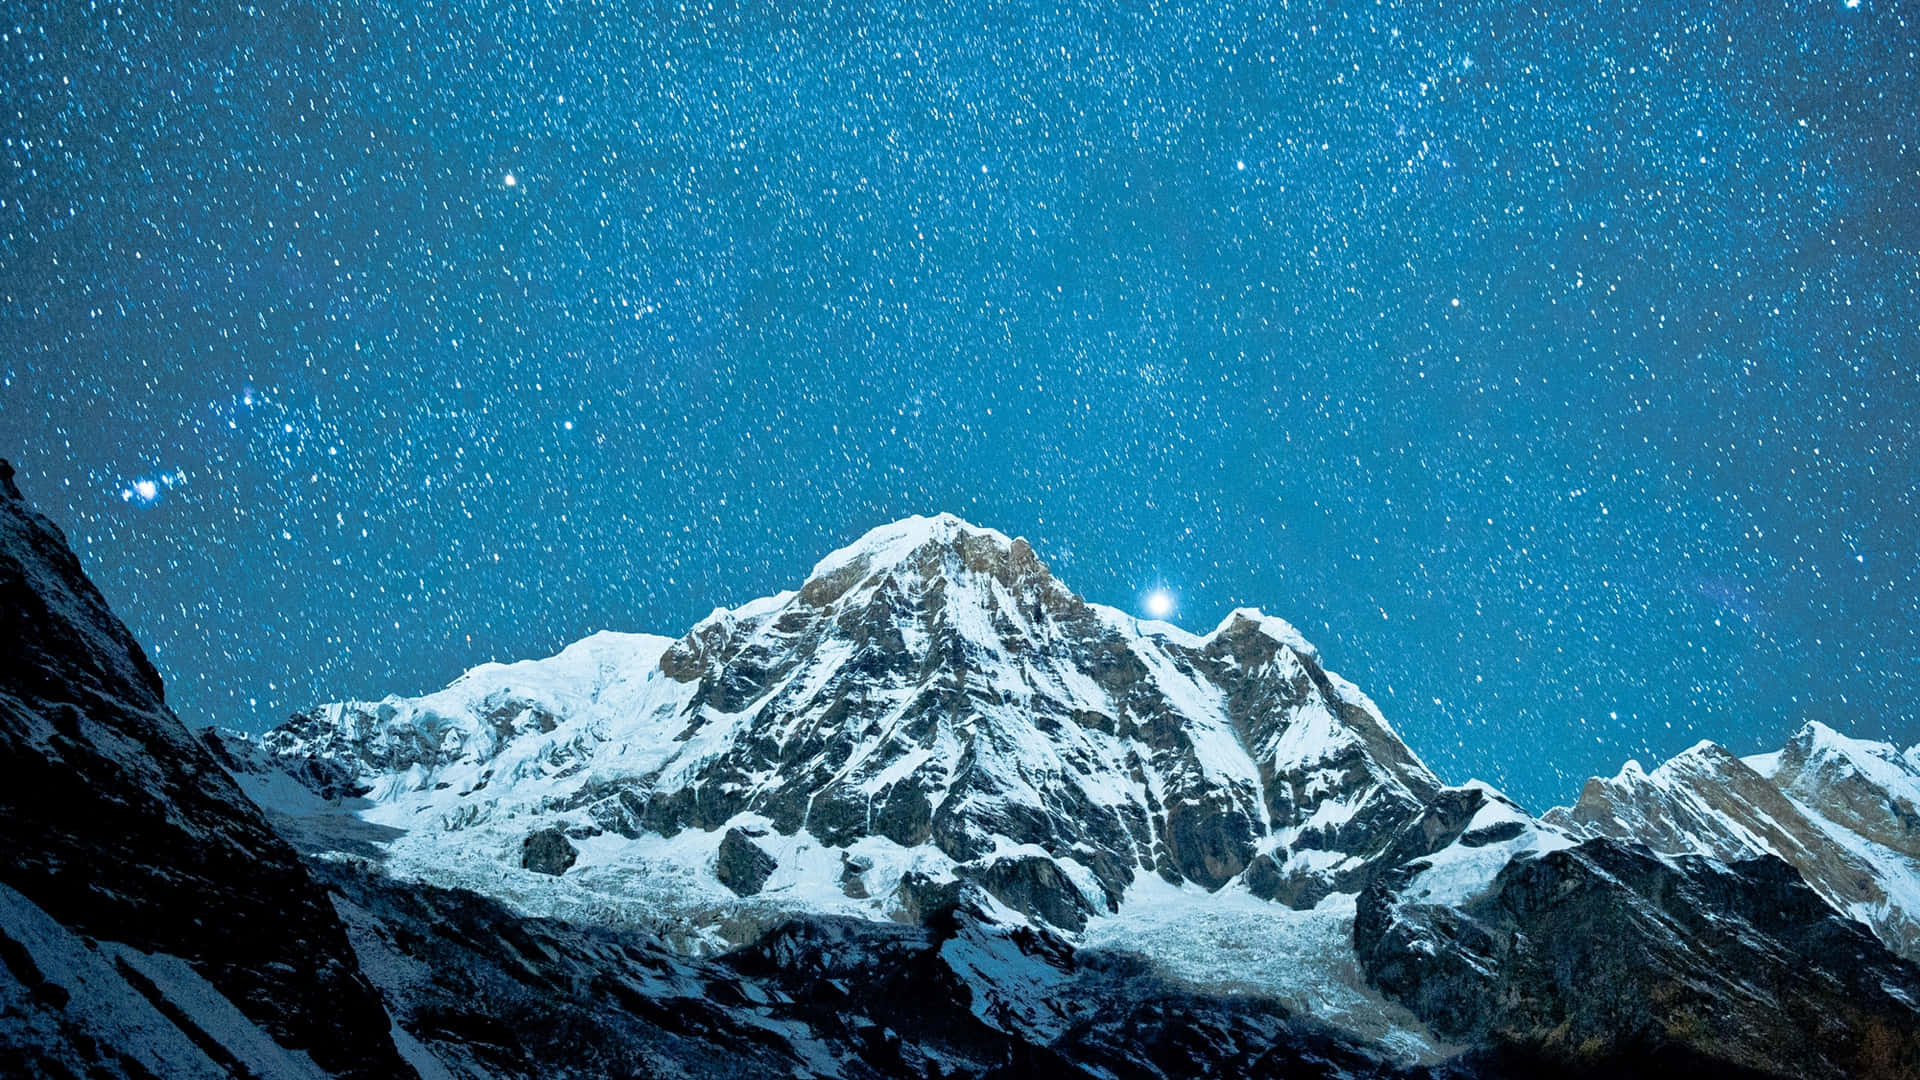 Explore the beauty of the Himalayan Mountains